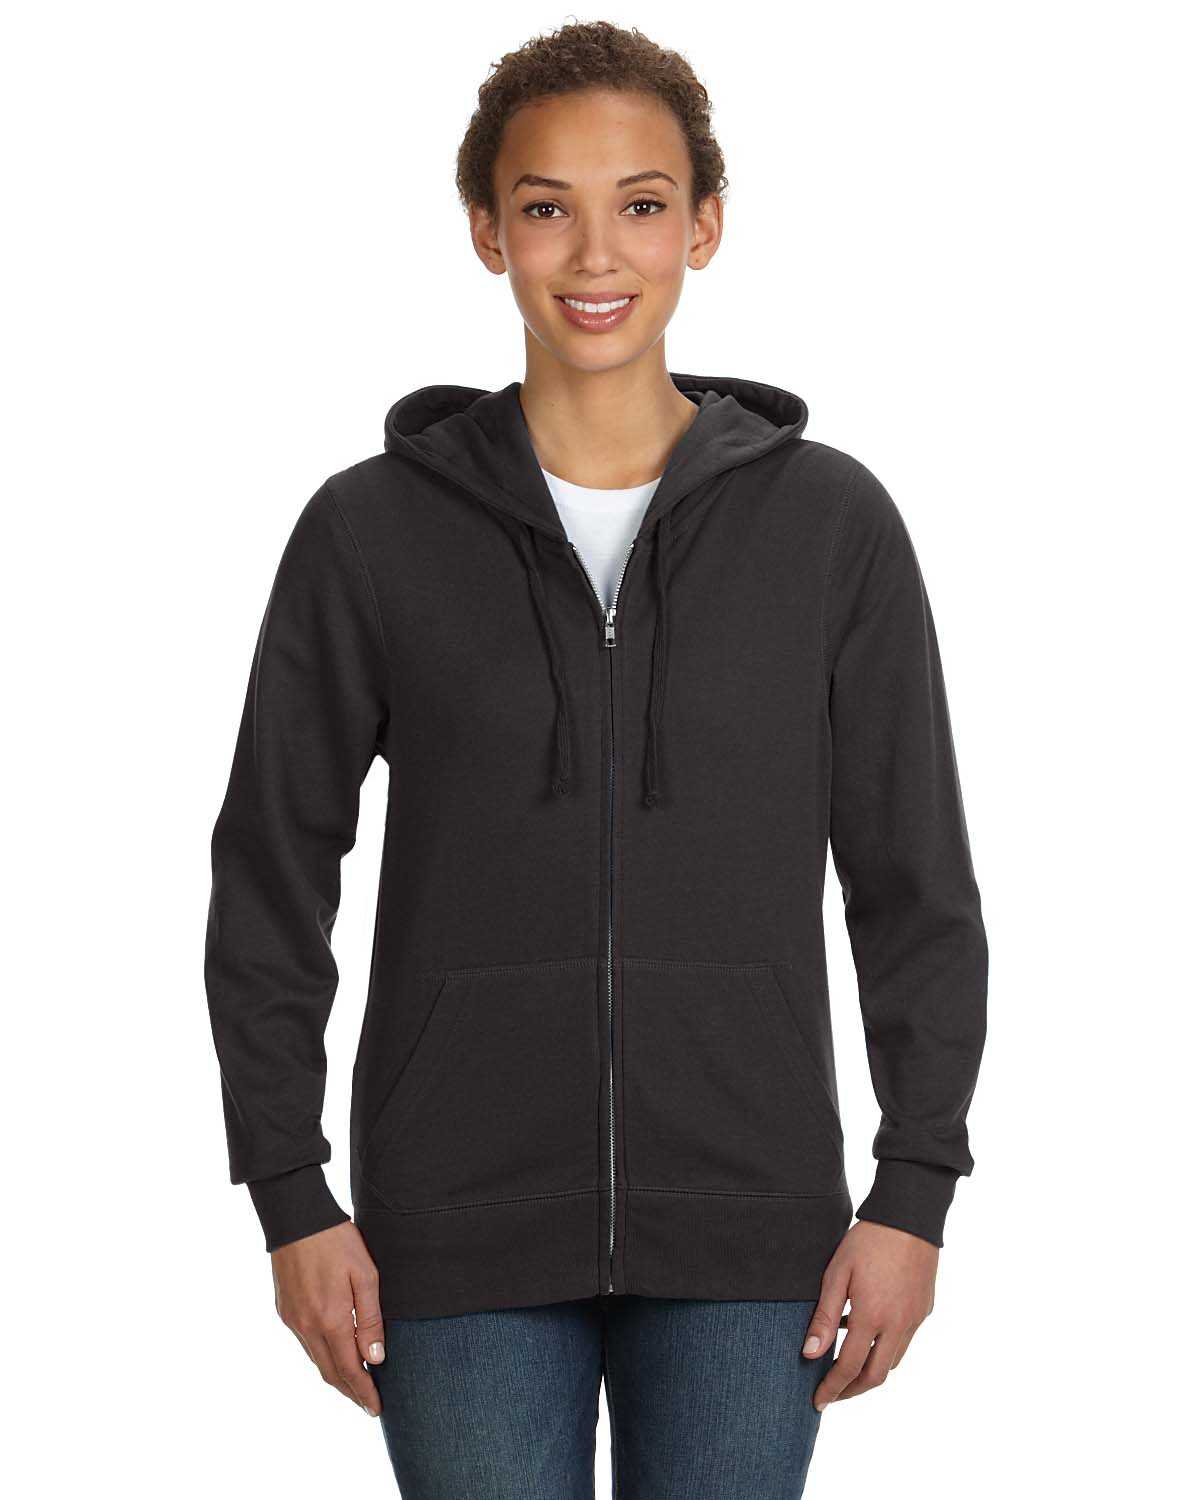 LAT 3763 Ladies' Zip French Terry Hoodie | ApparelChoice.com